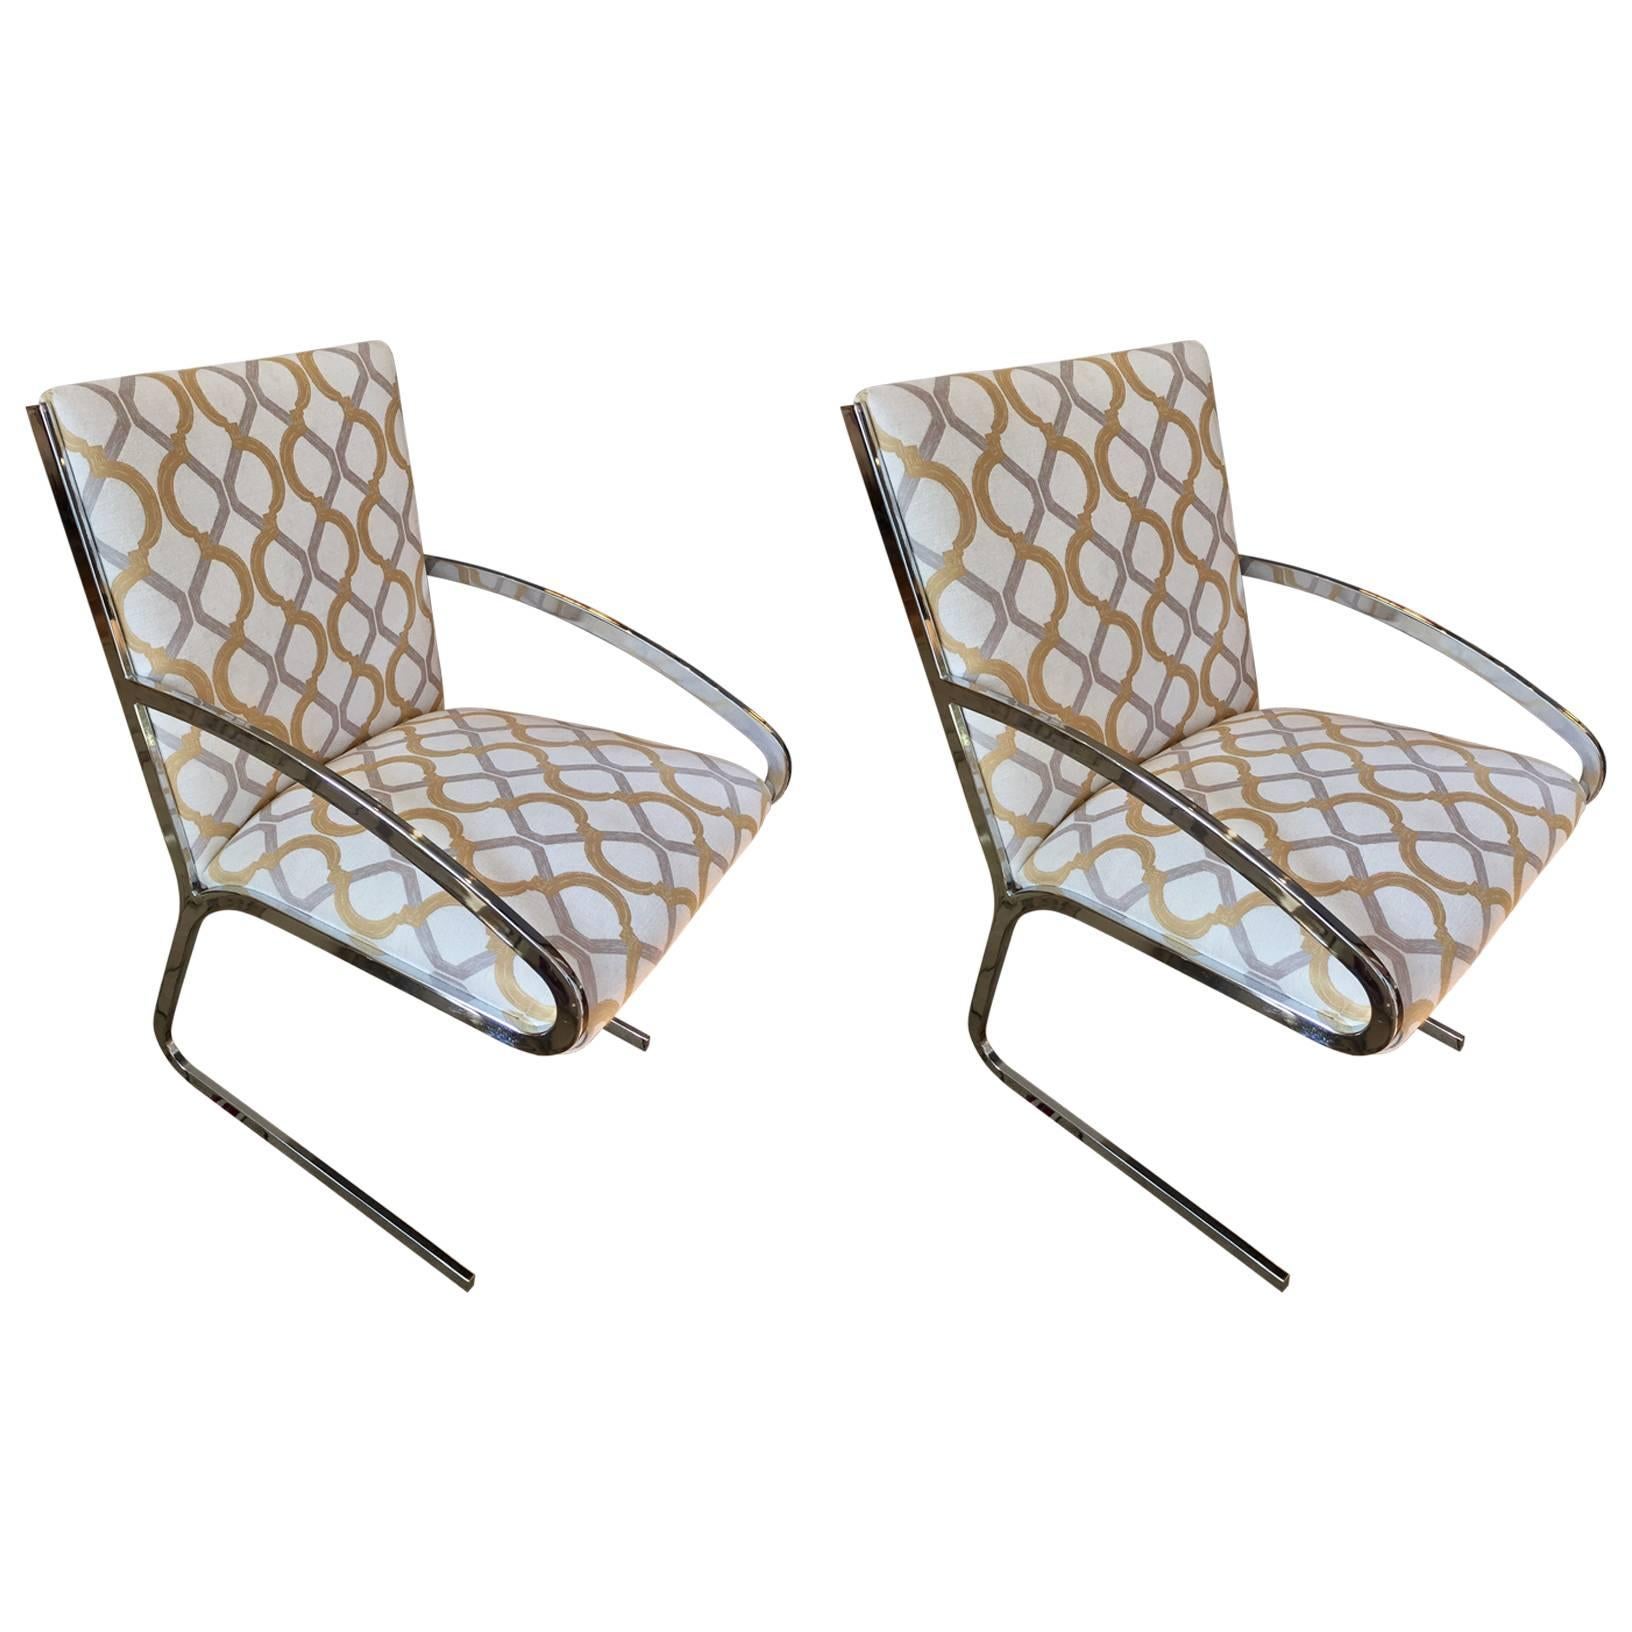 Pair of Mid-Century Modern Chrome and Chenille Armchairs